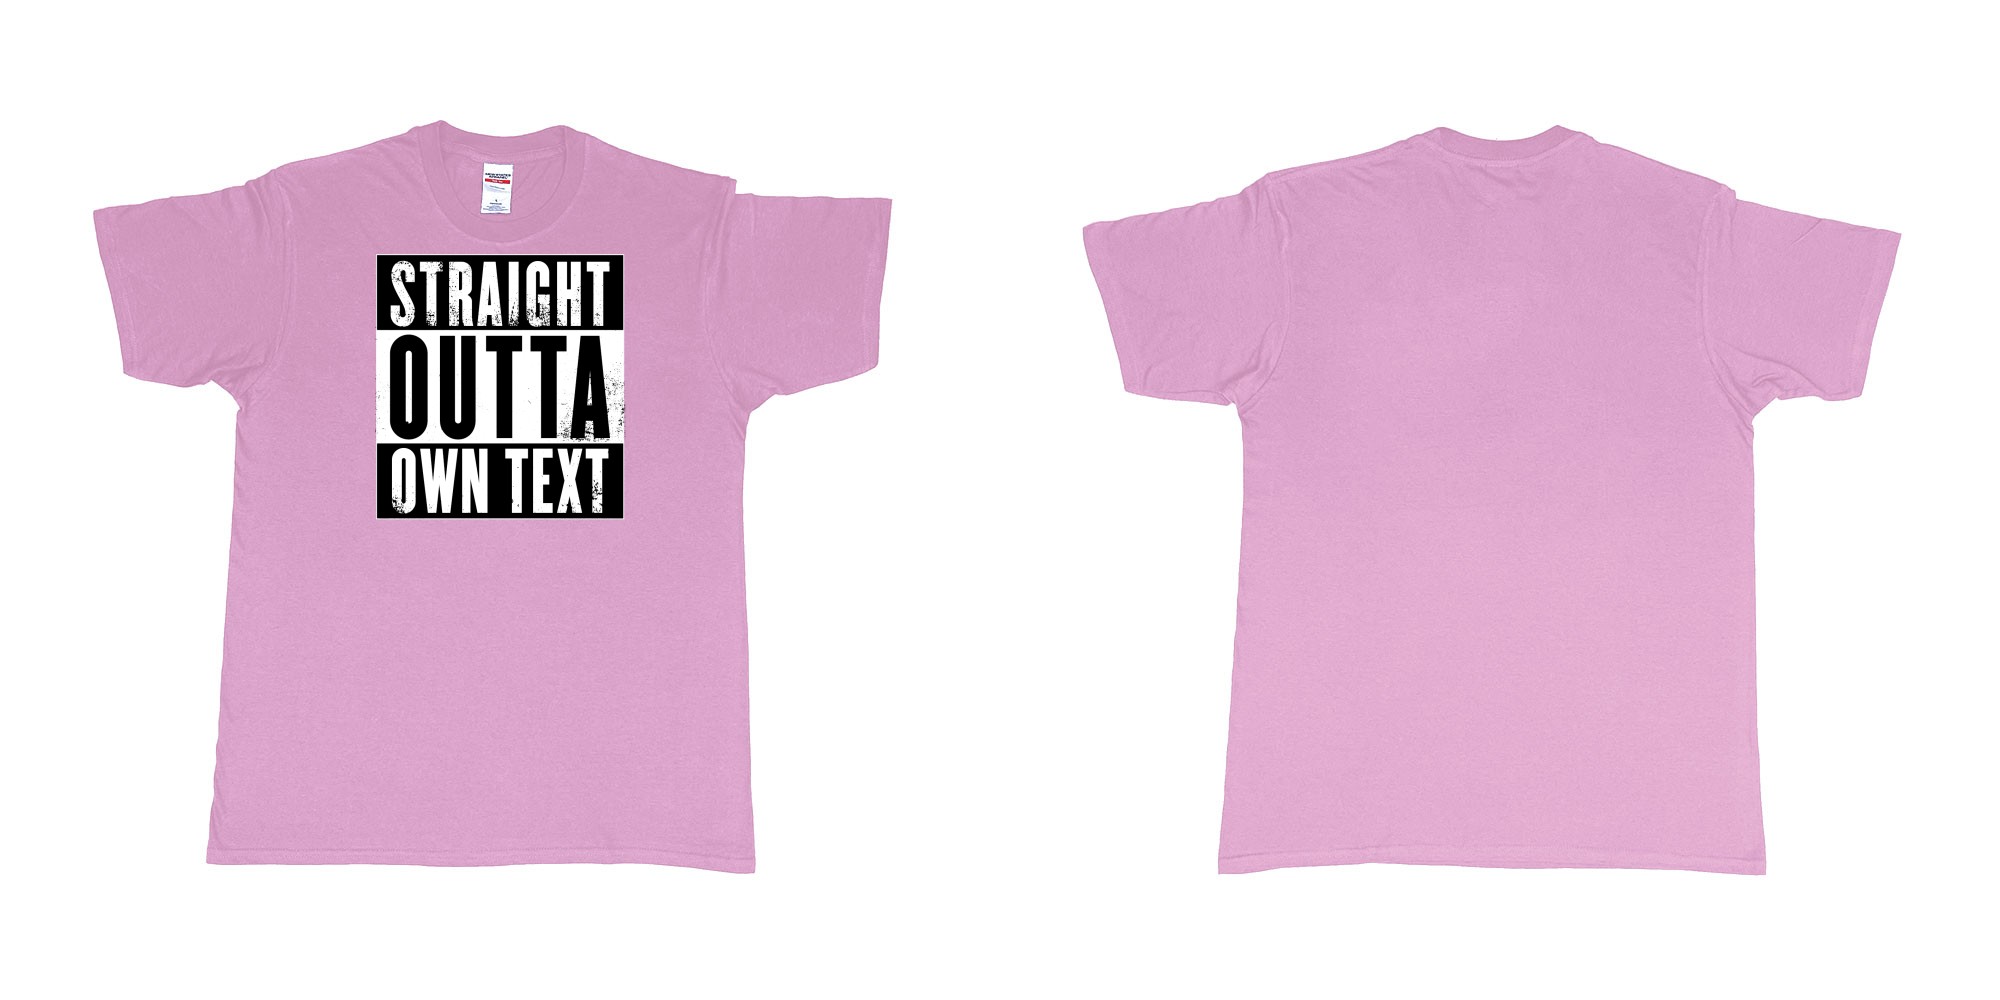 Custom tshirt design Straight Outta Compton in fabric color light-pink choice your own text made in Bali by The Pirate Way